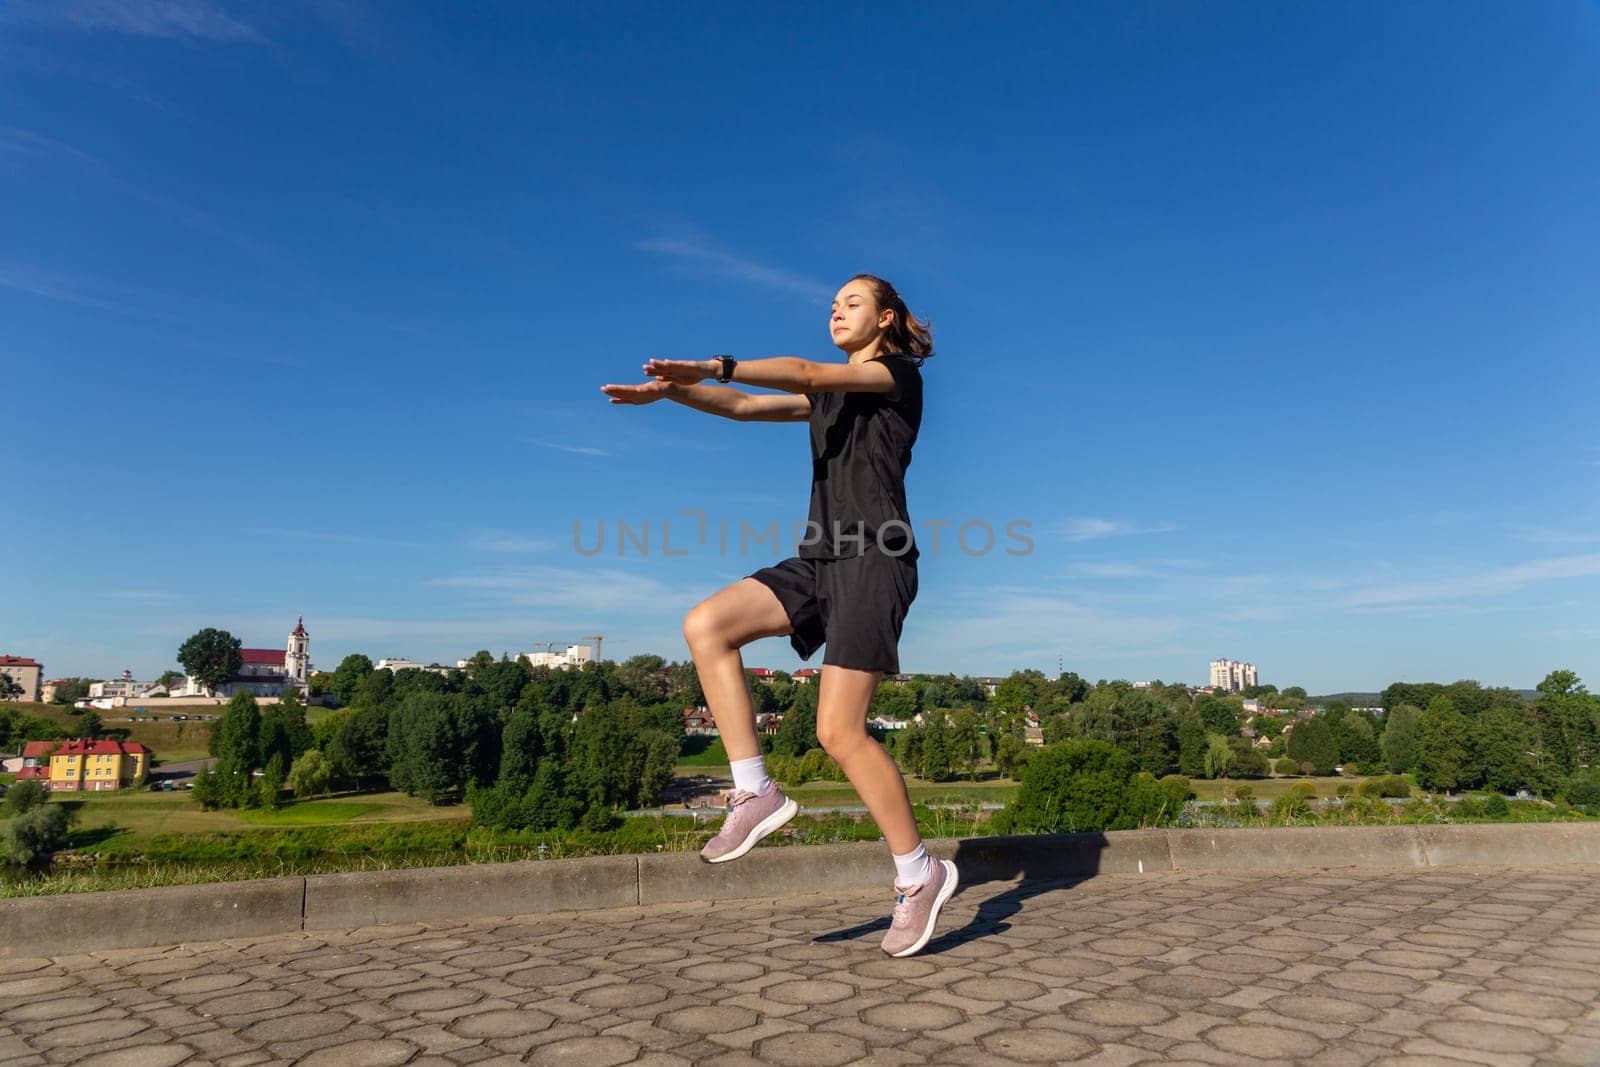 Young, fit and sporty girl in black clothes stretching after the workout in the urban city park. Fitness, sport, urban jogging and healthy lifestyle concept.